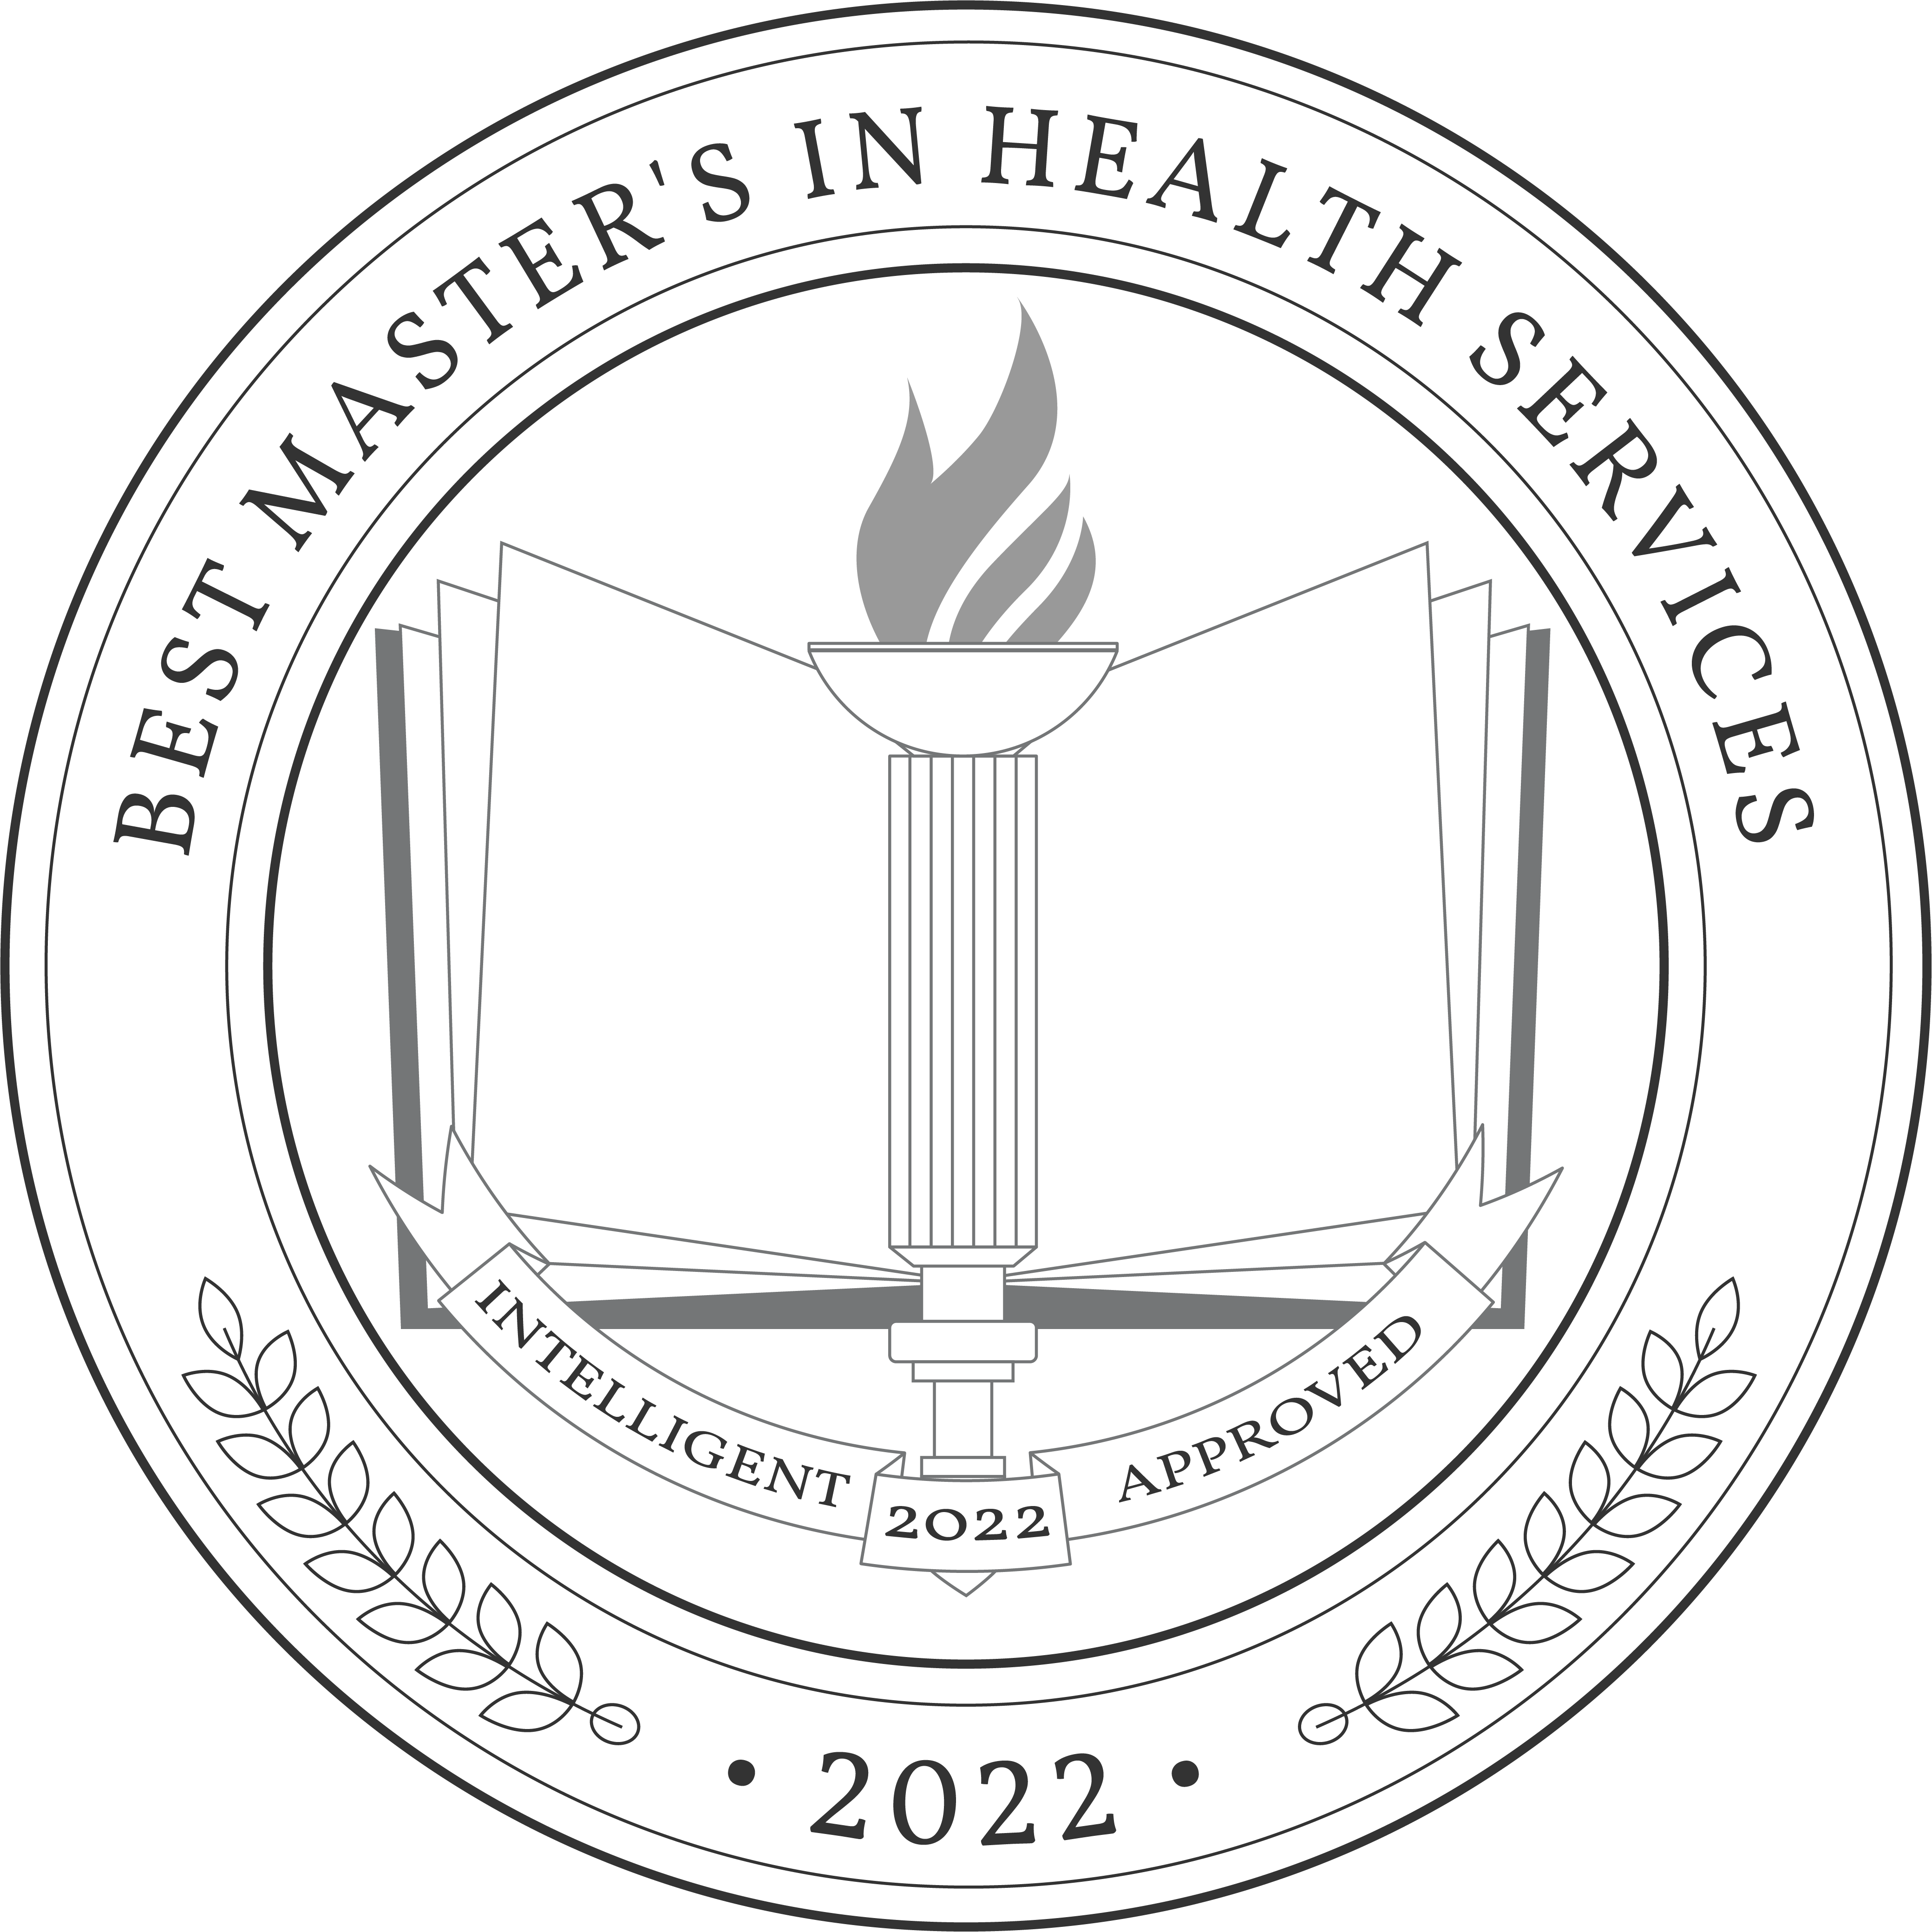 Best-Masters-in-Health-Services-Badge.png